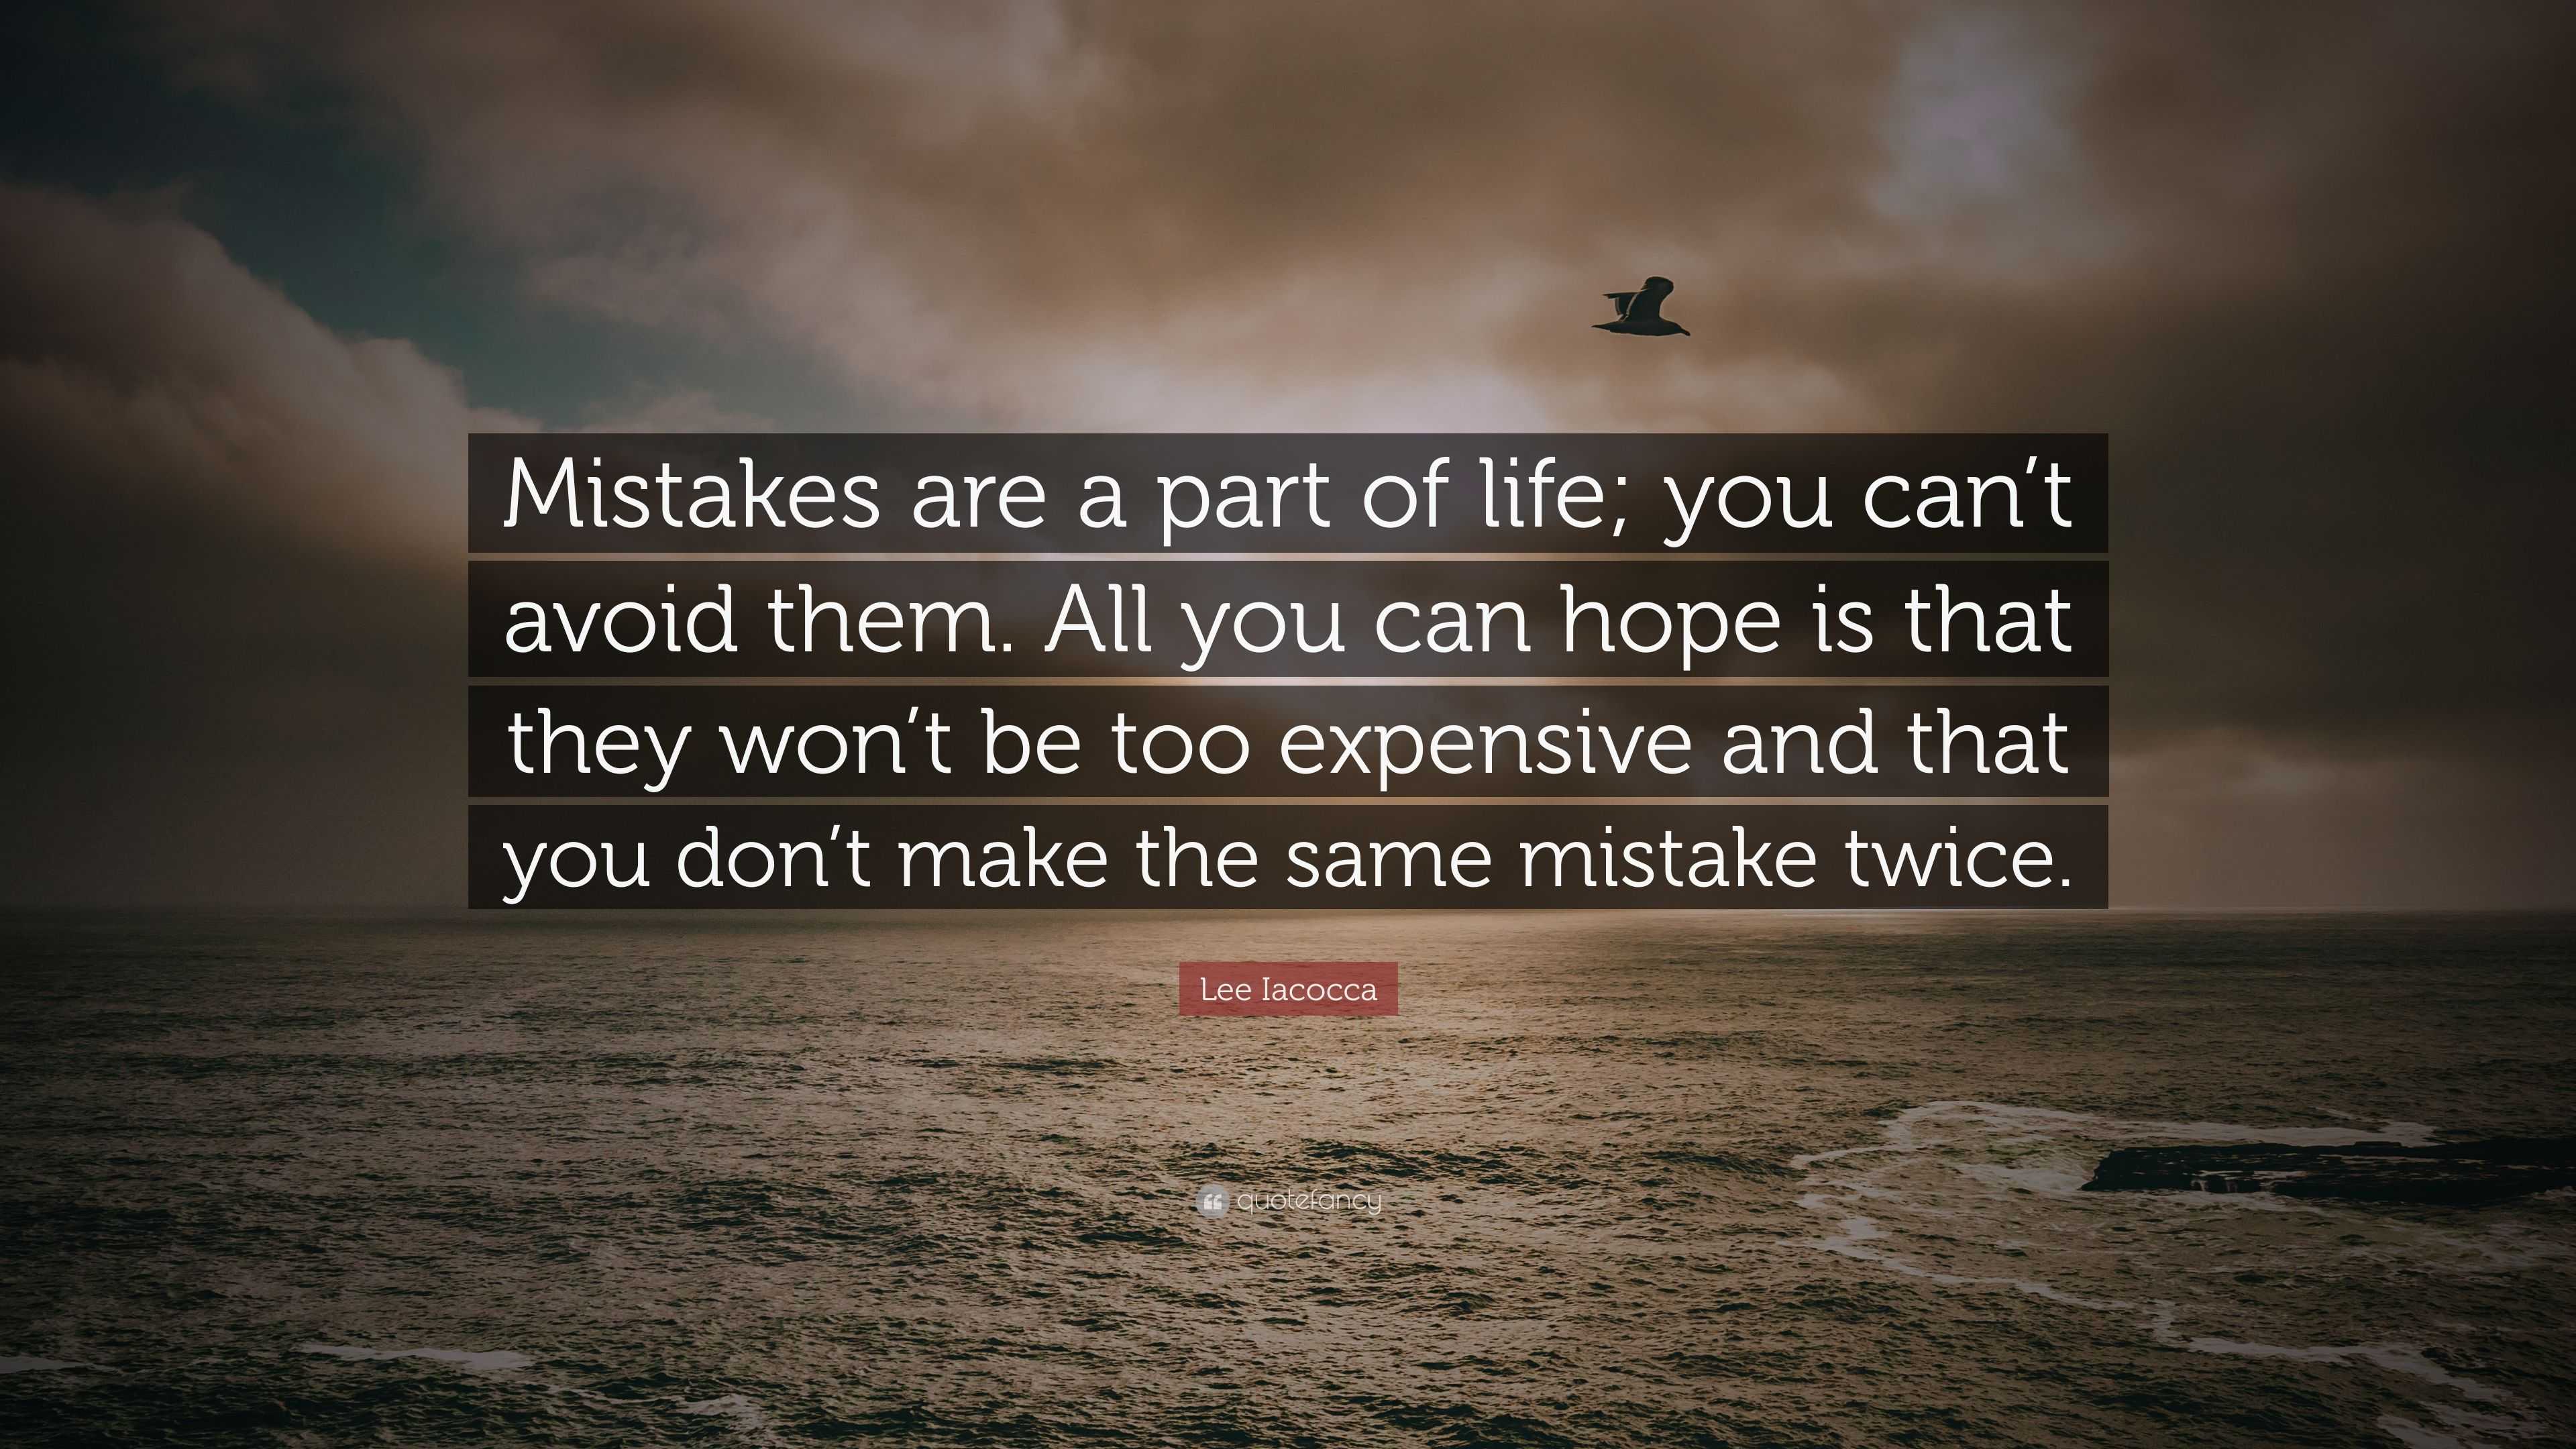 Lee Iacocca Quote: “Mistakes are a part of life; you can't avoid